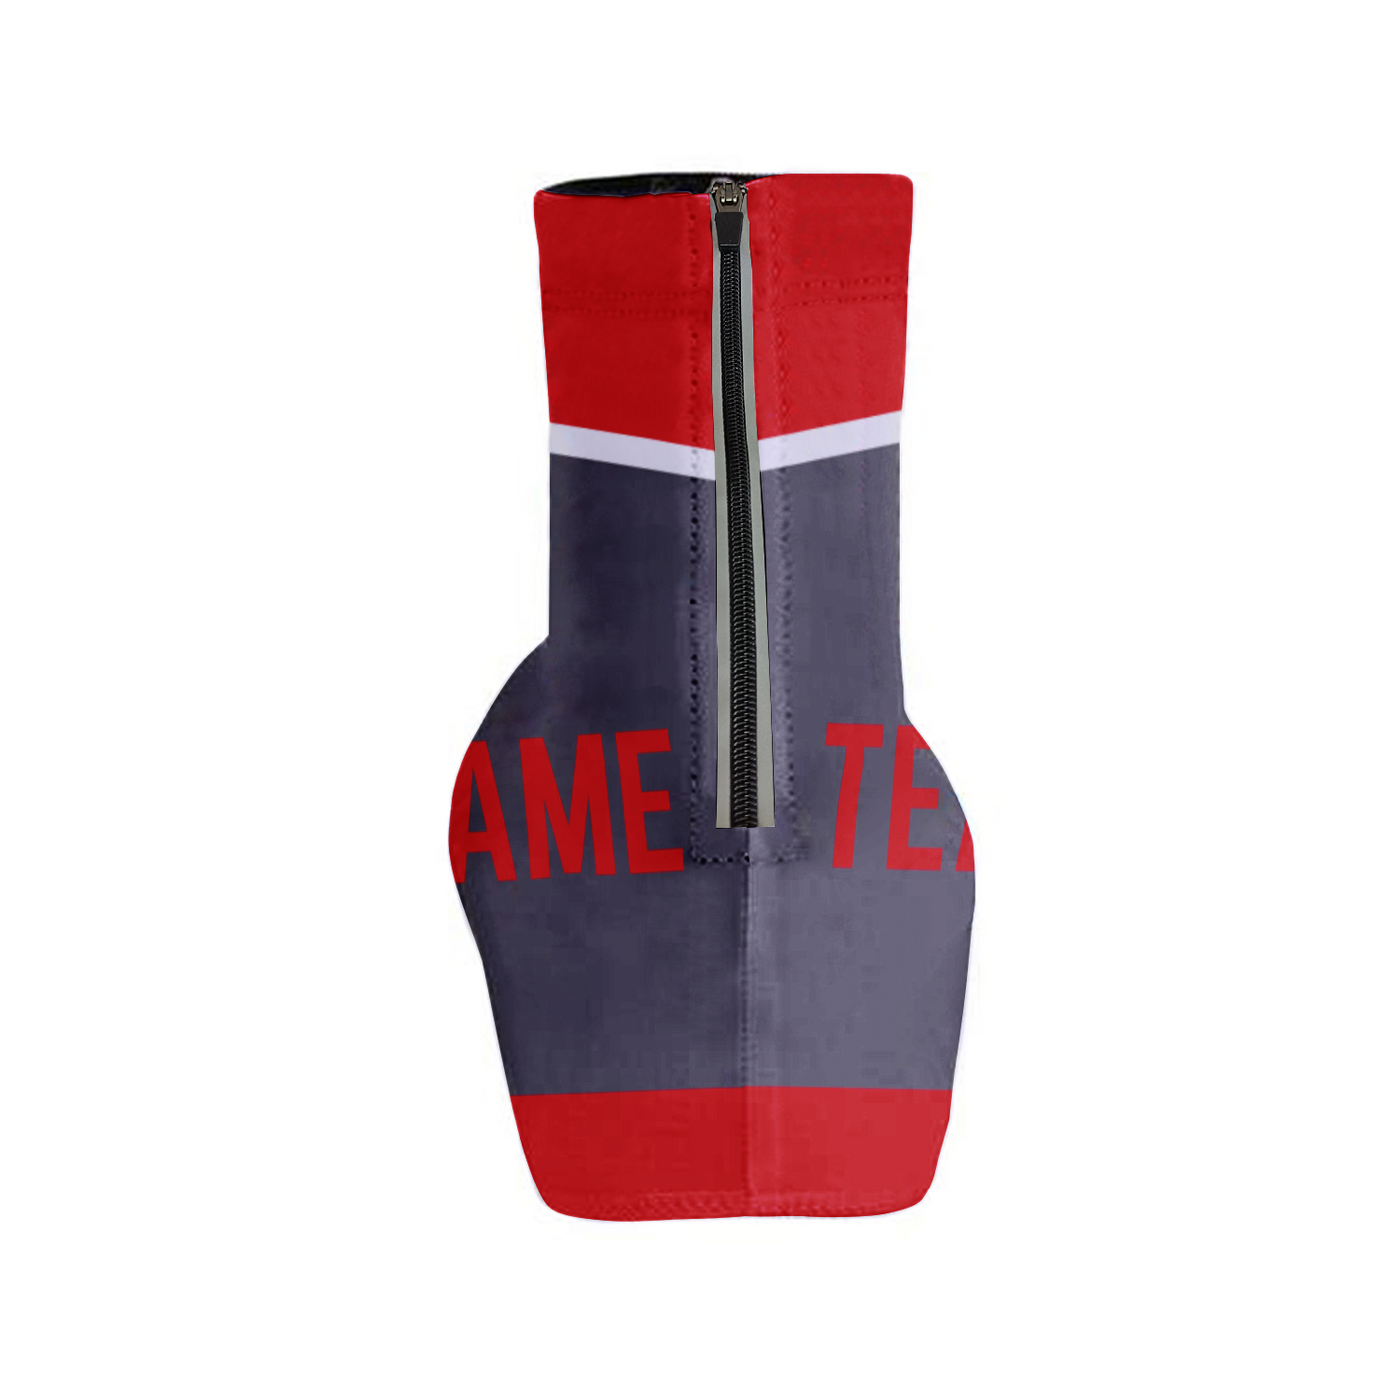 Customized Tampa Bay Team Cycling Shoe Covers